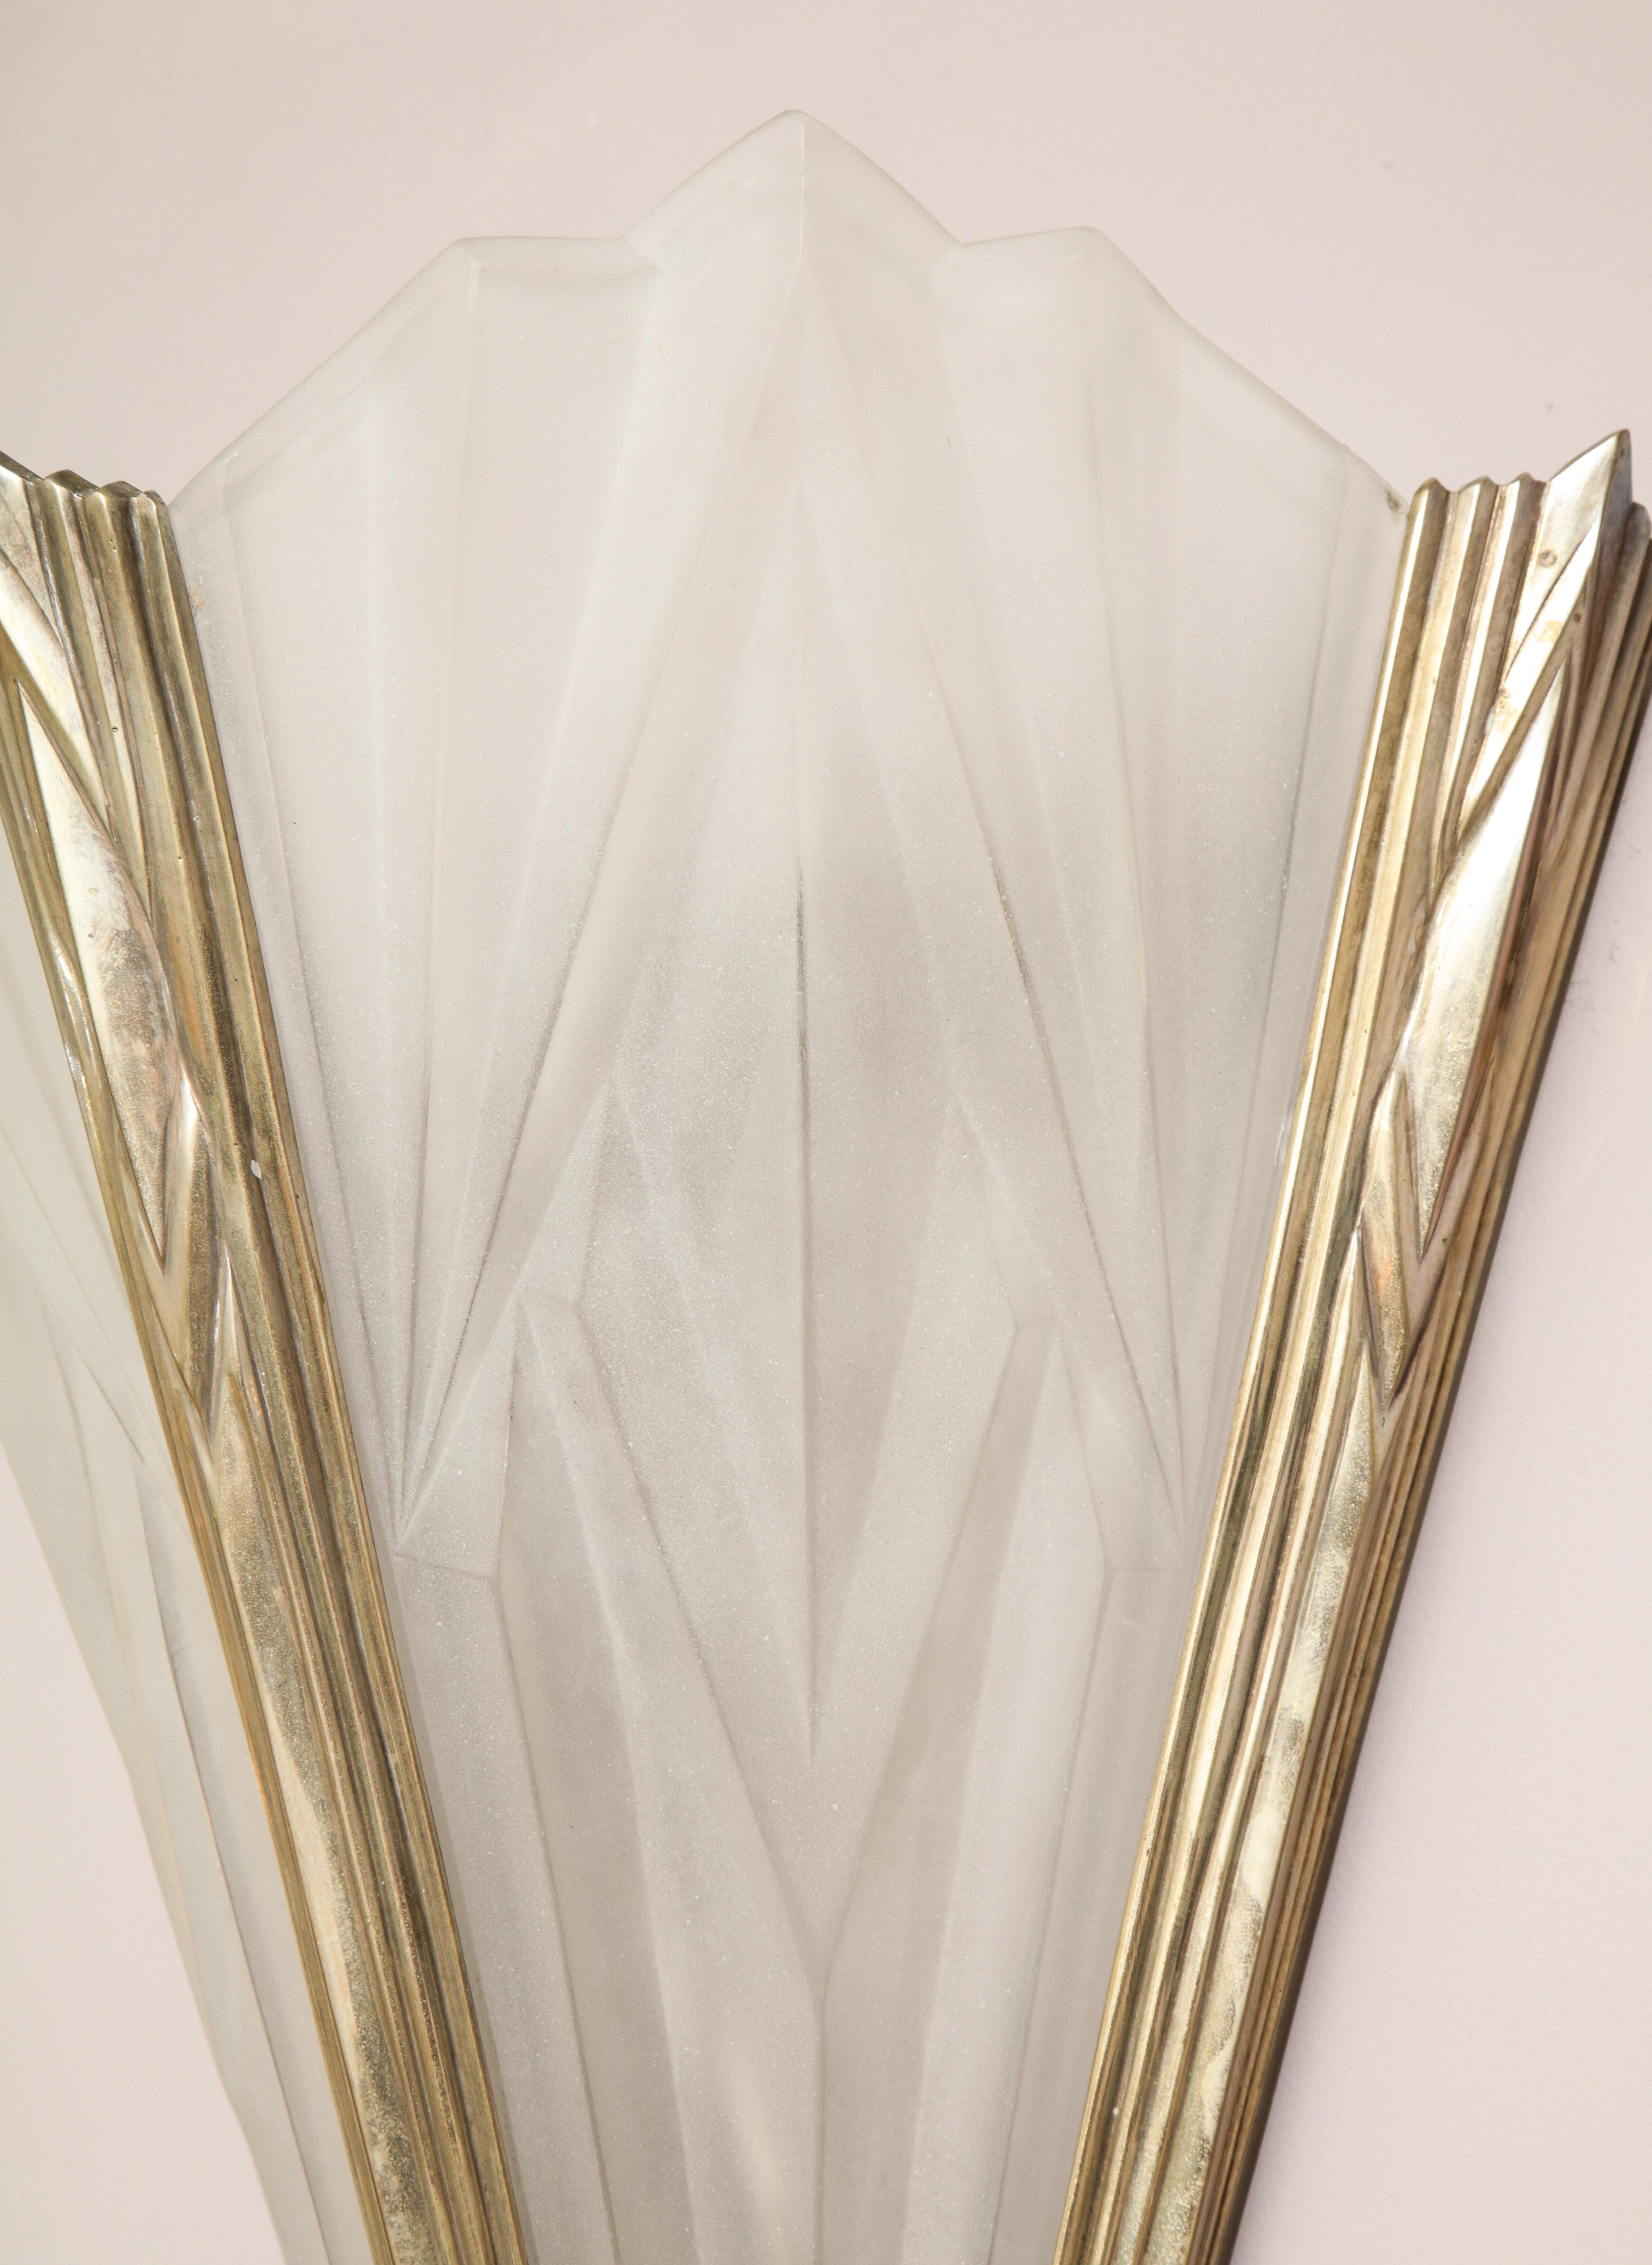 American French Deco Frosted Geometric Glass Sconces